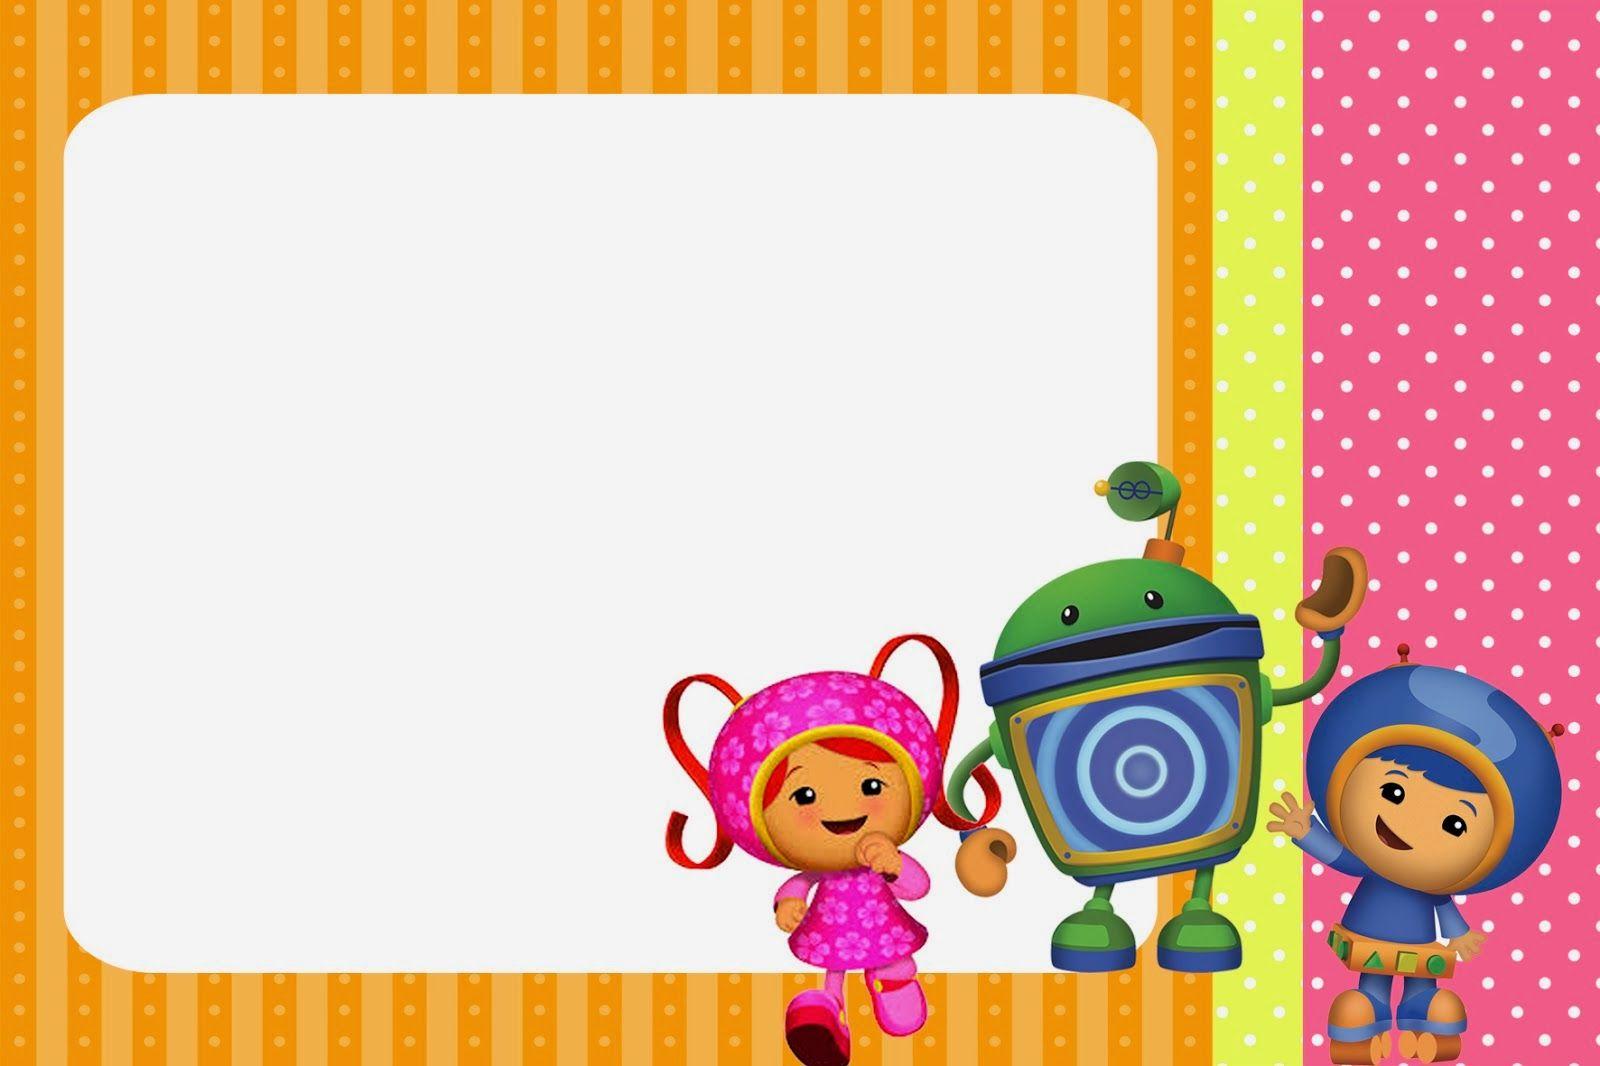 Umizoomi: Free Party Printables, Image and Invitations